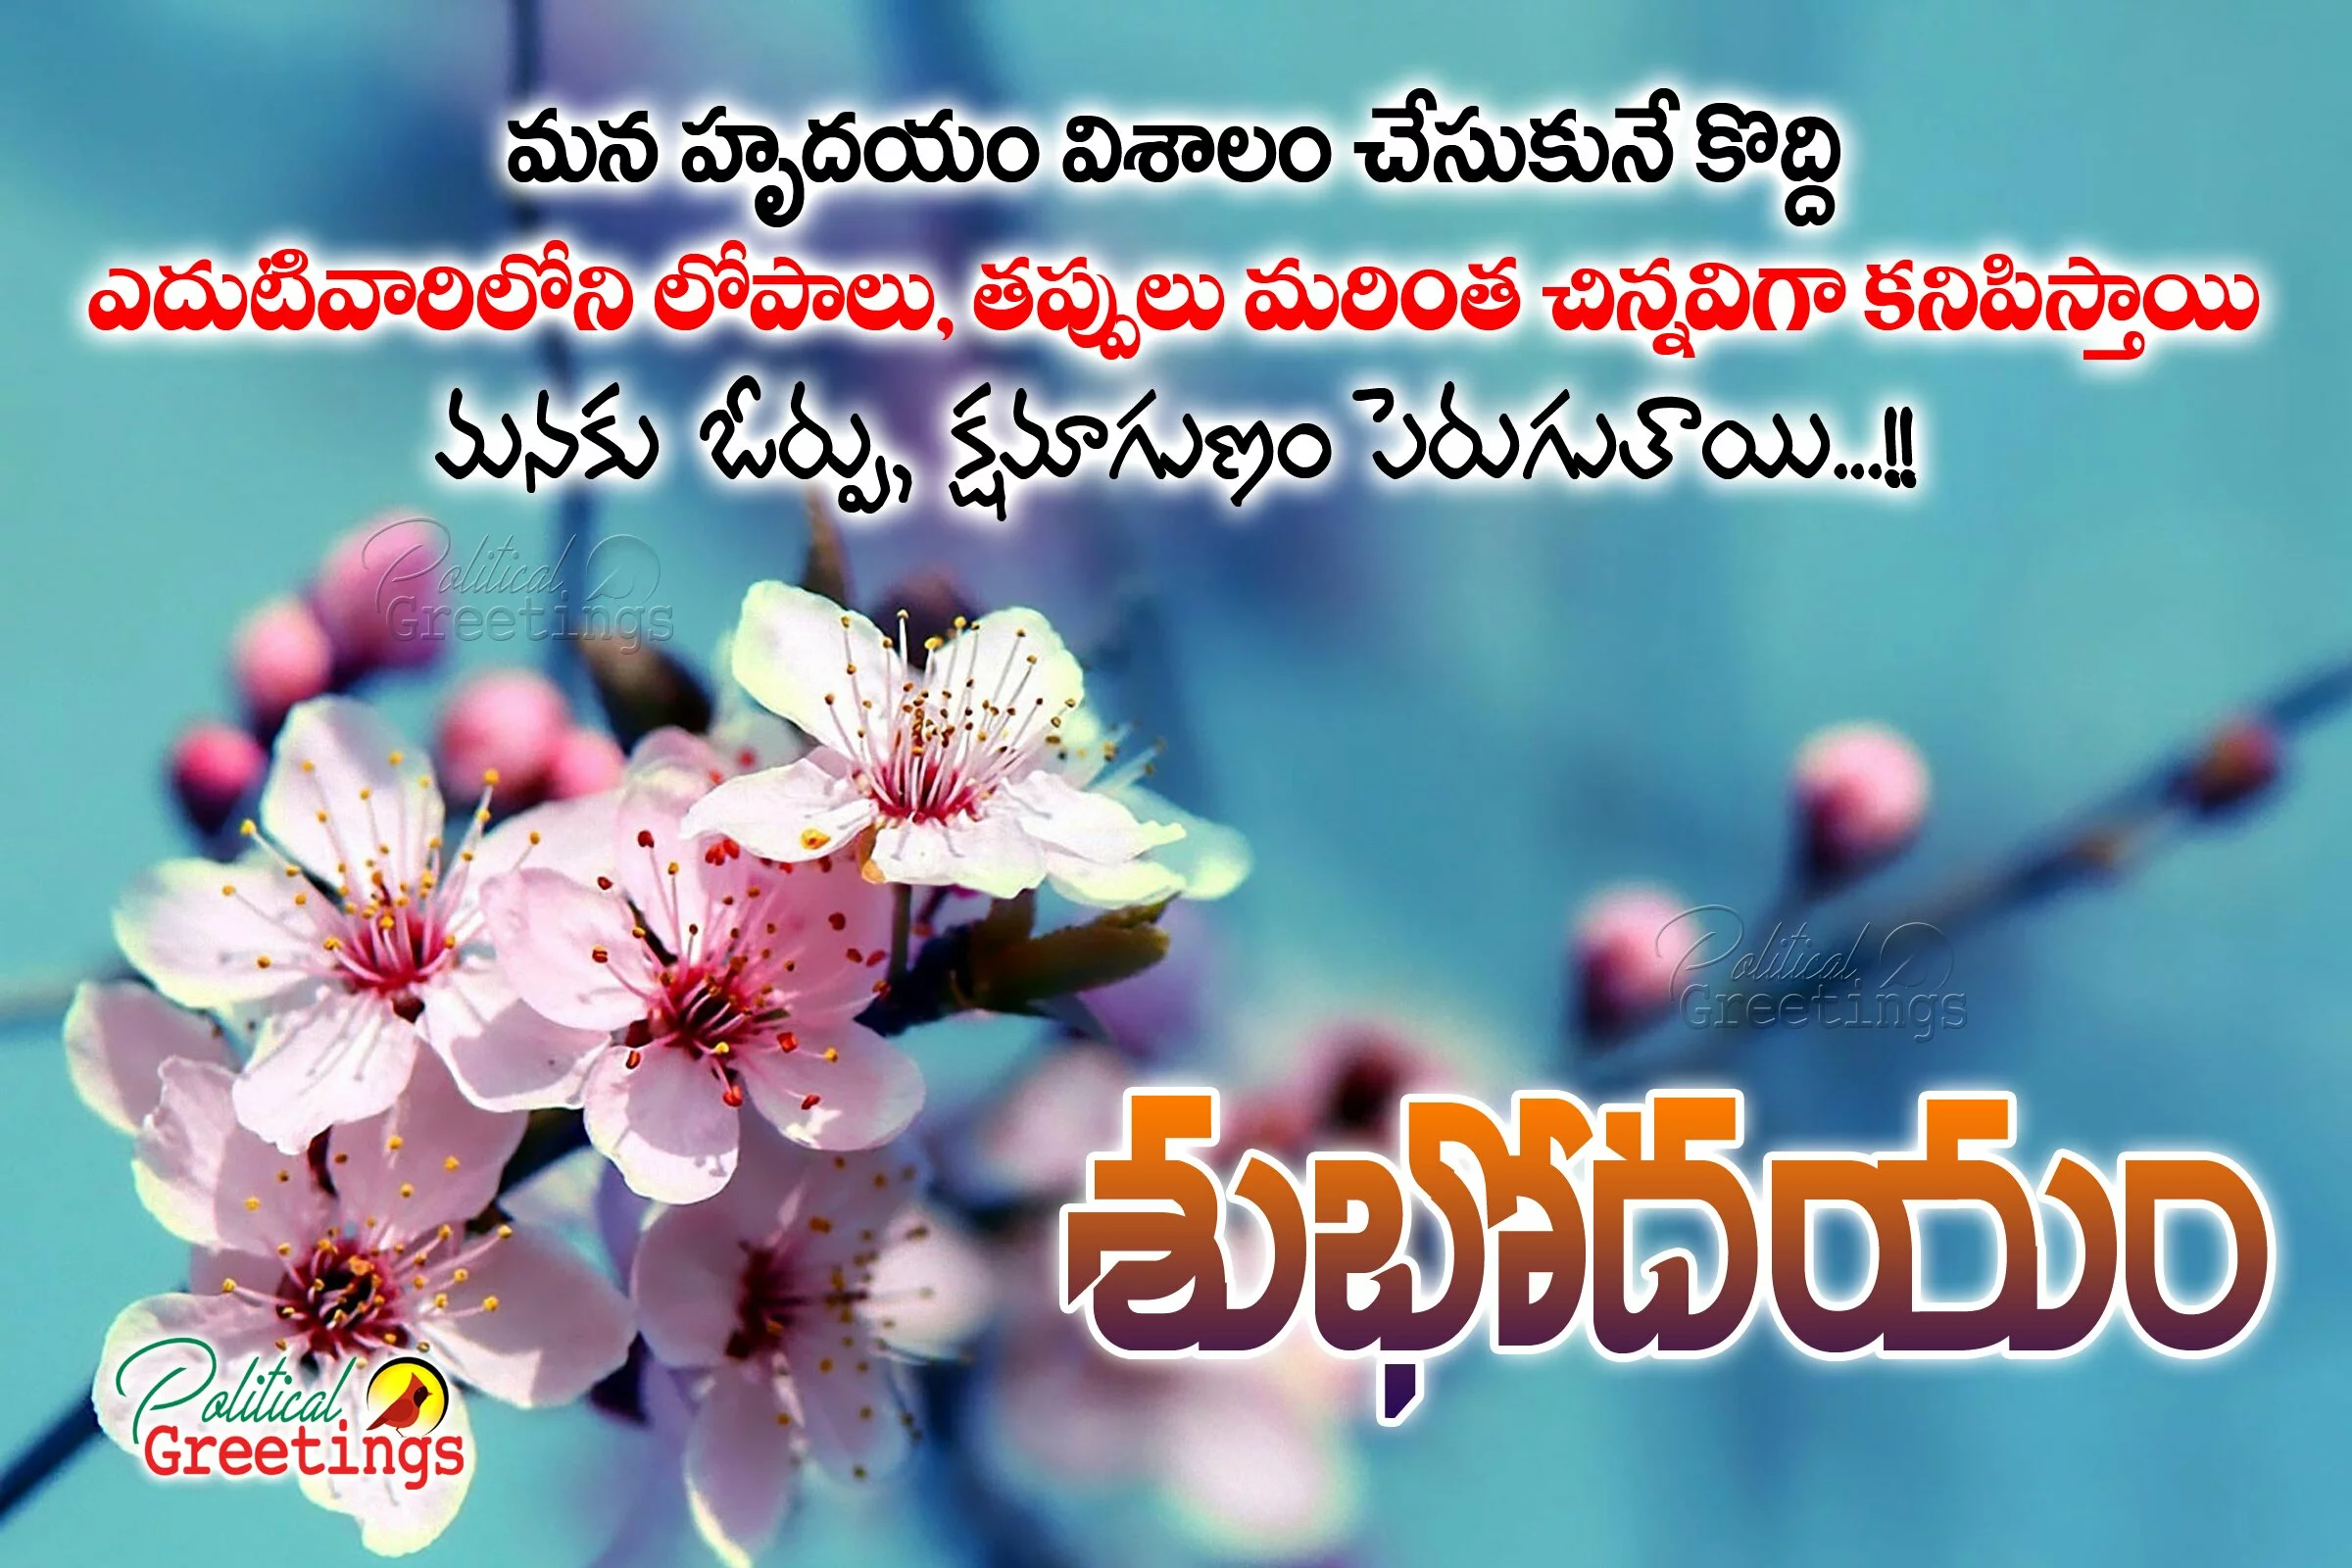 good-morning-telugu-life-quotes-images-with-motivational-messages